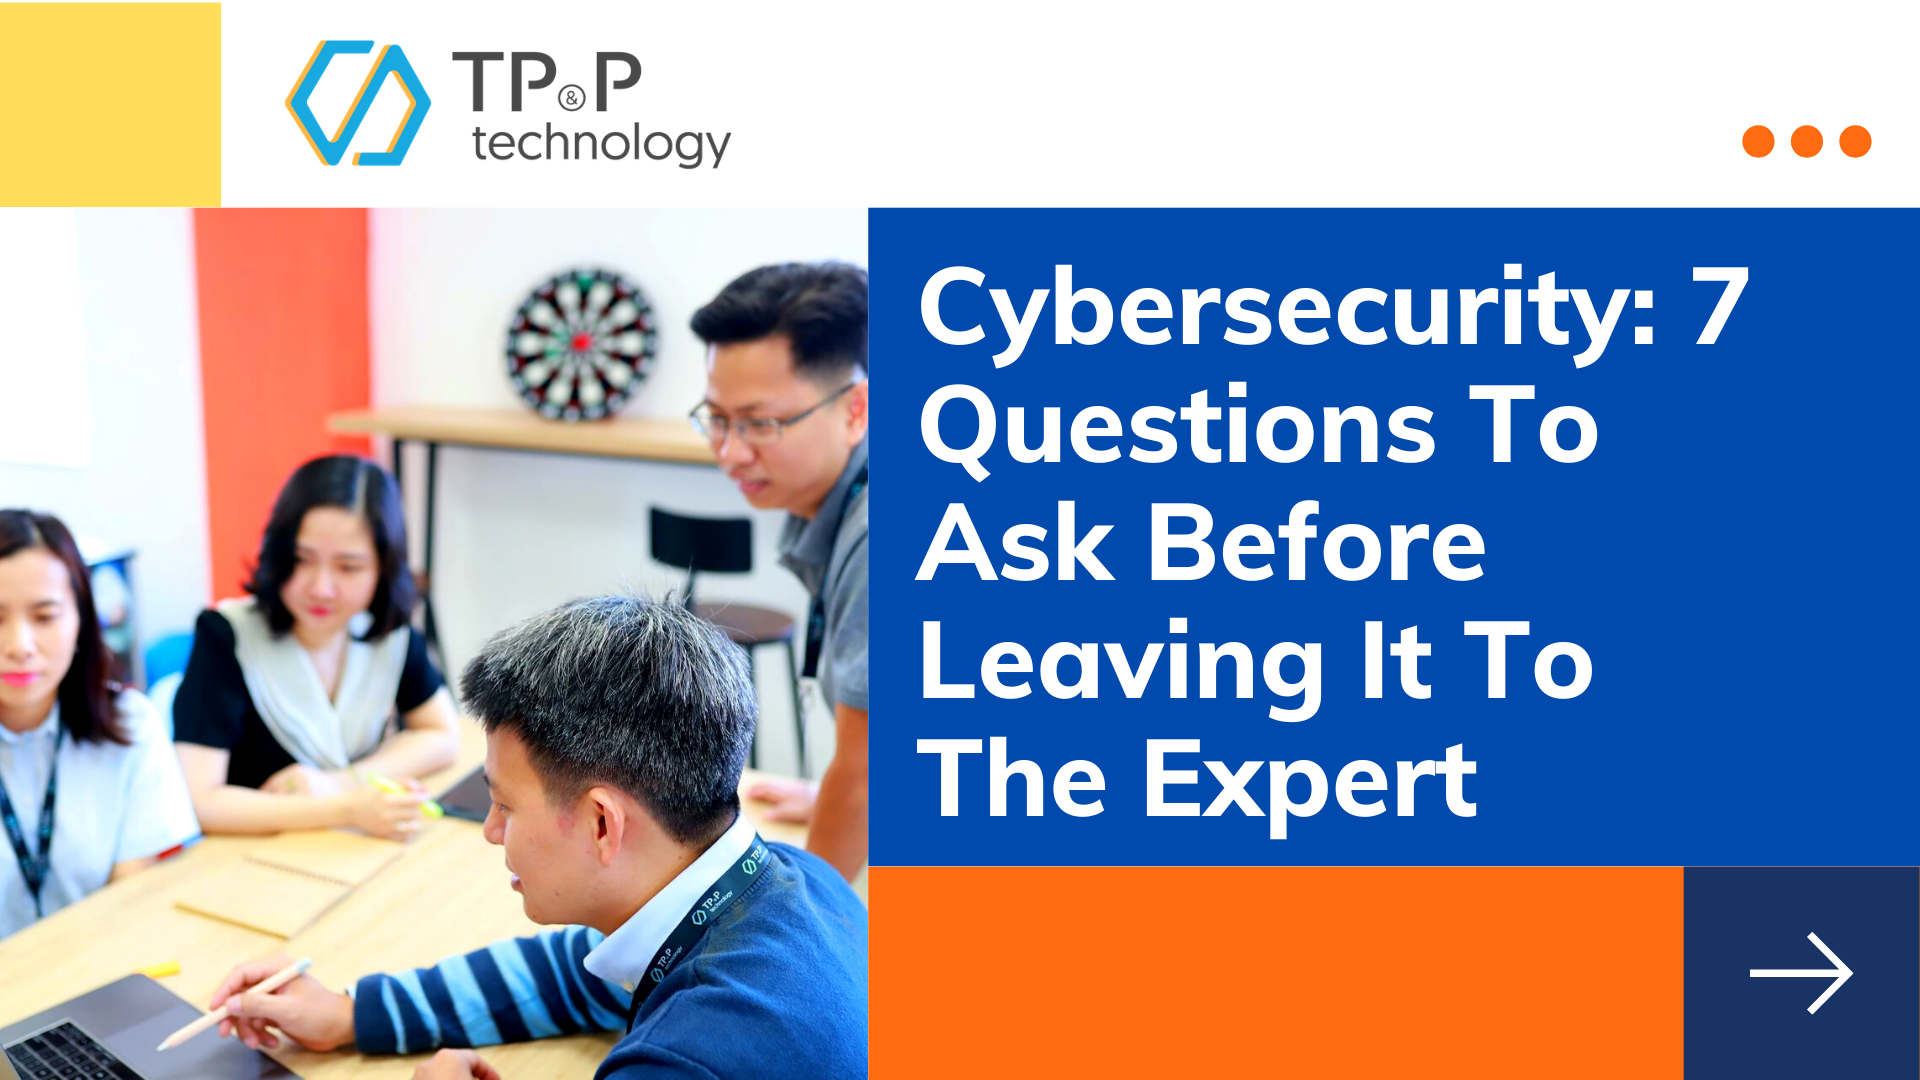 Cybersecurity: 7 Questions To Ask Before Leaving It To The Expert